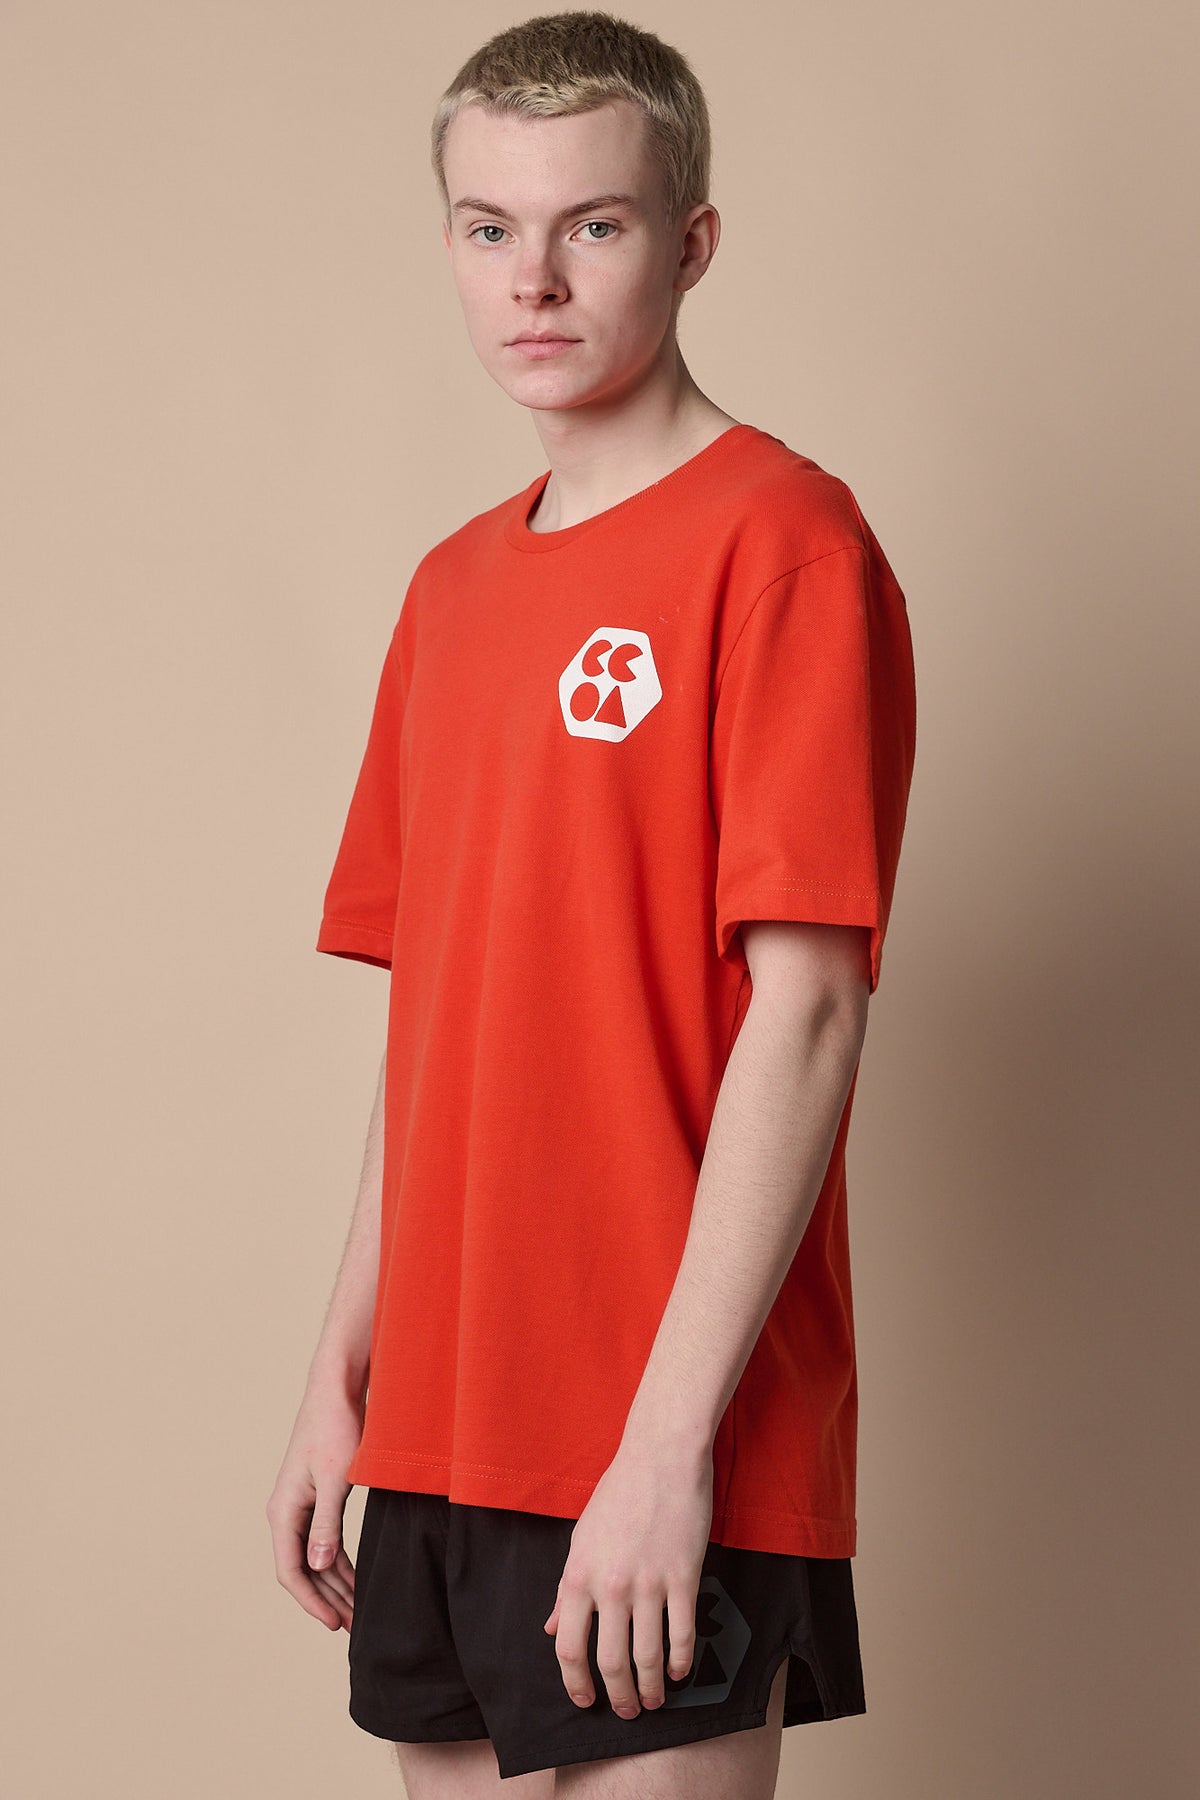 
            Thigh up image of white male wearing breathable t shirt plastic free in flame red with CCOA logo